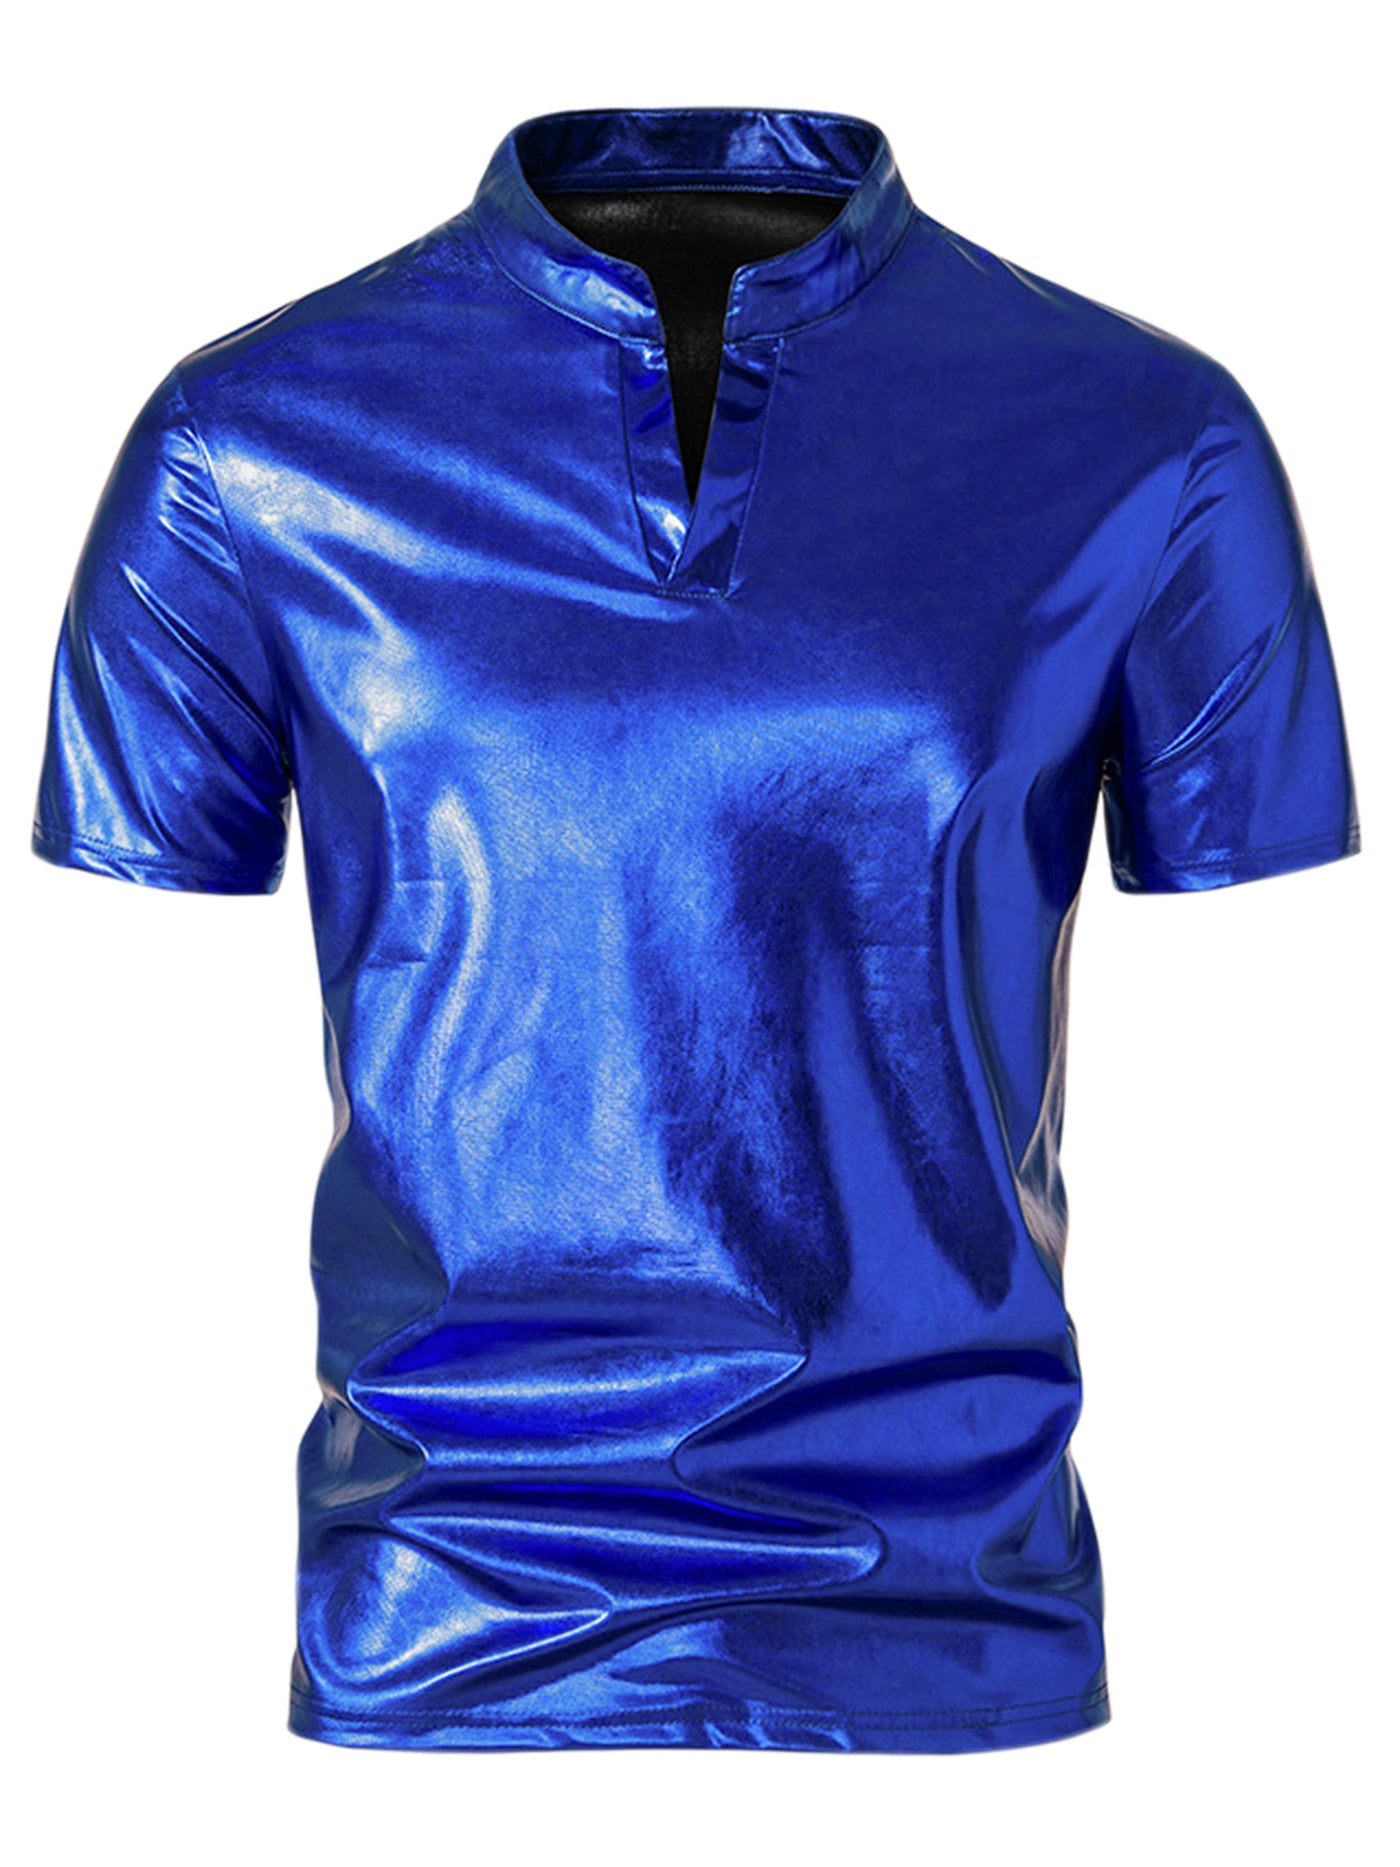 Bublédon Metallic T-Shirt for Men's Stand Collared Shiny Disco Party Short Sleeves Polo Tee